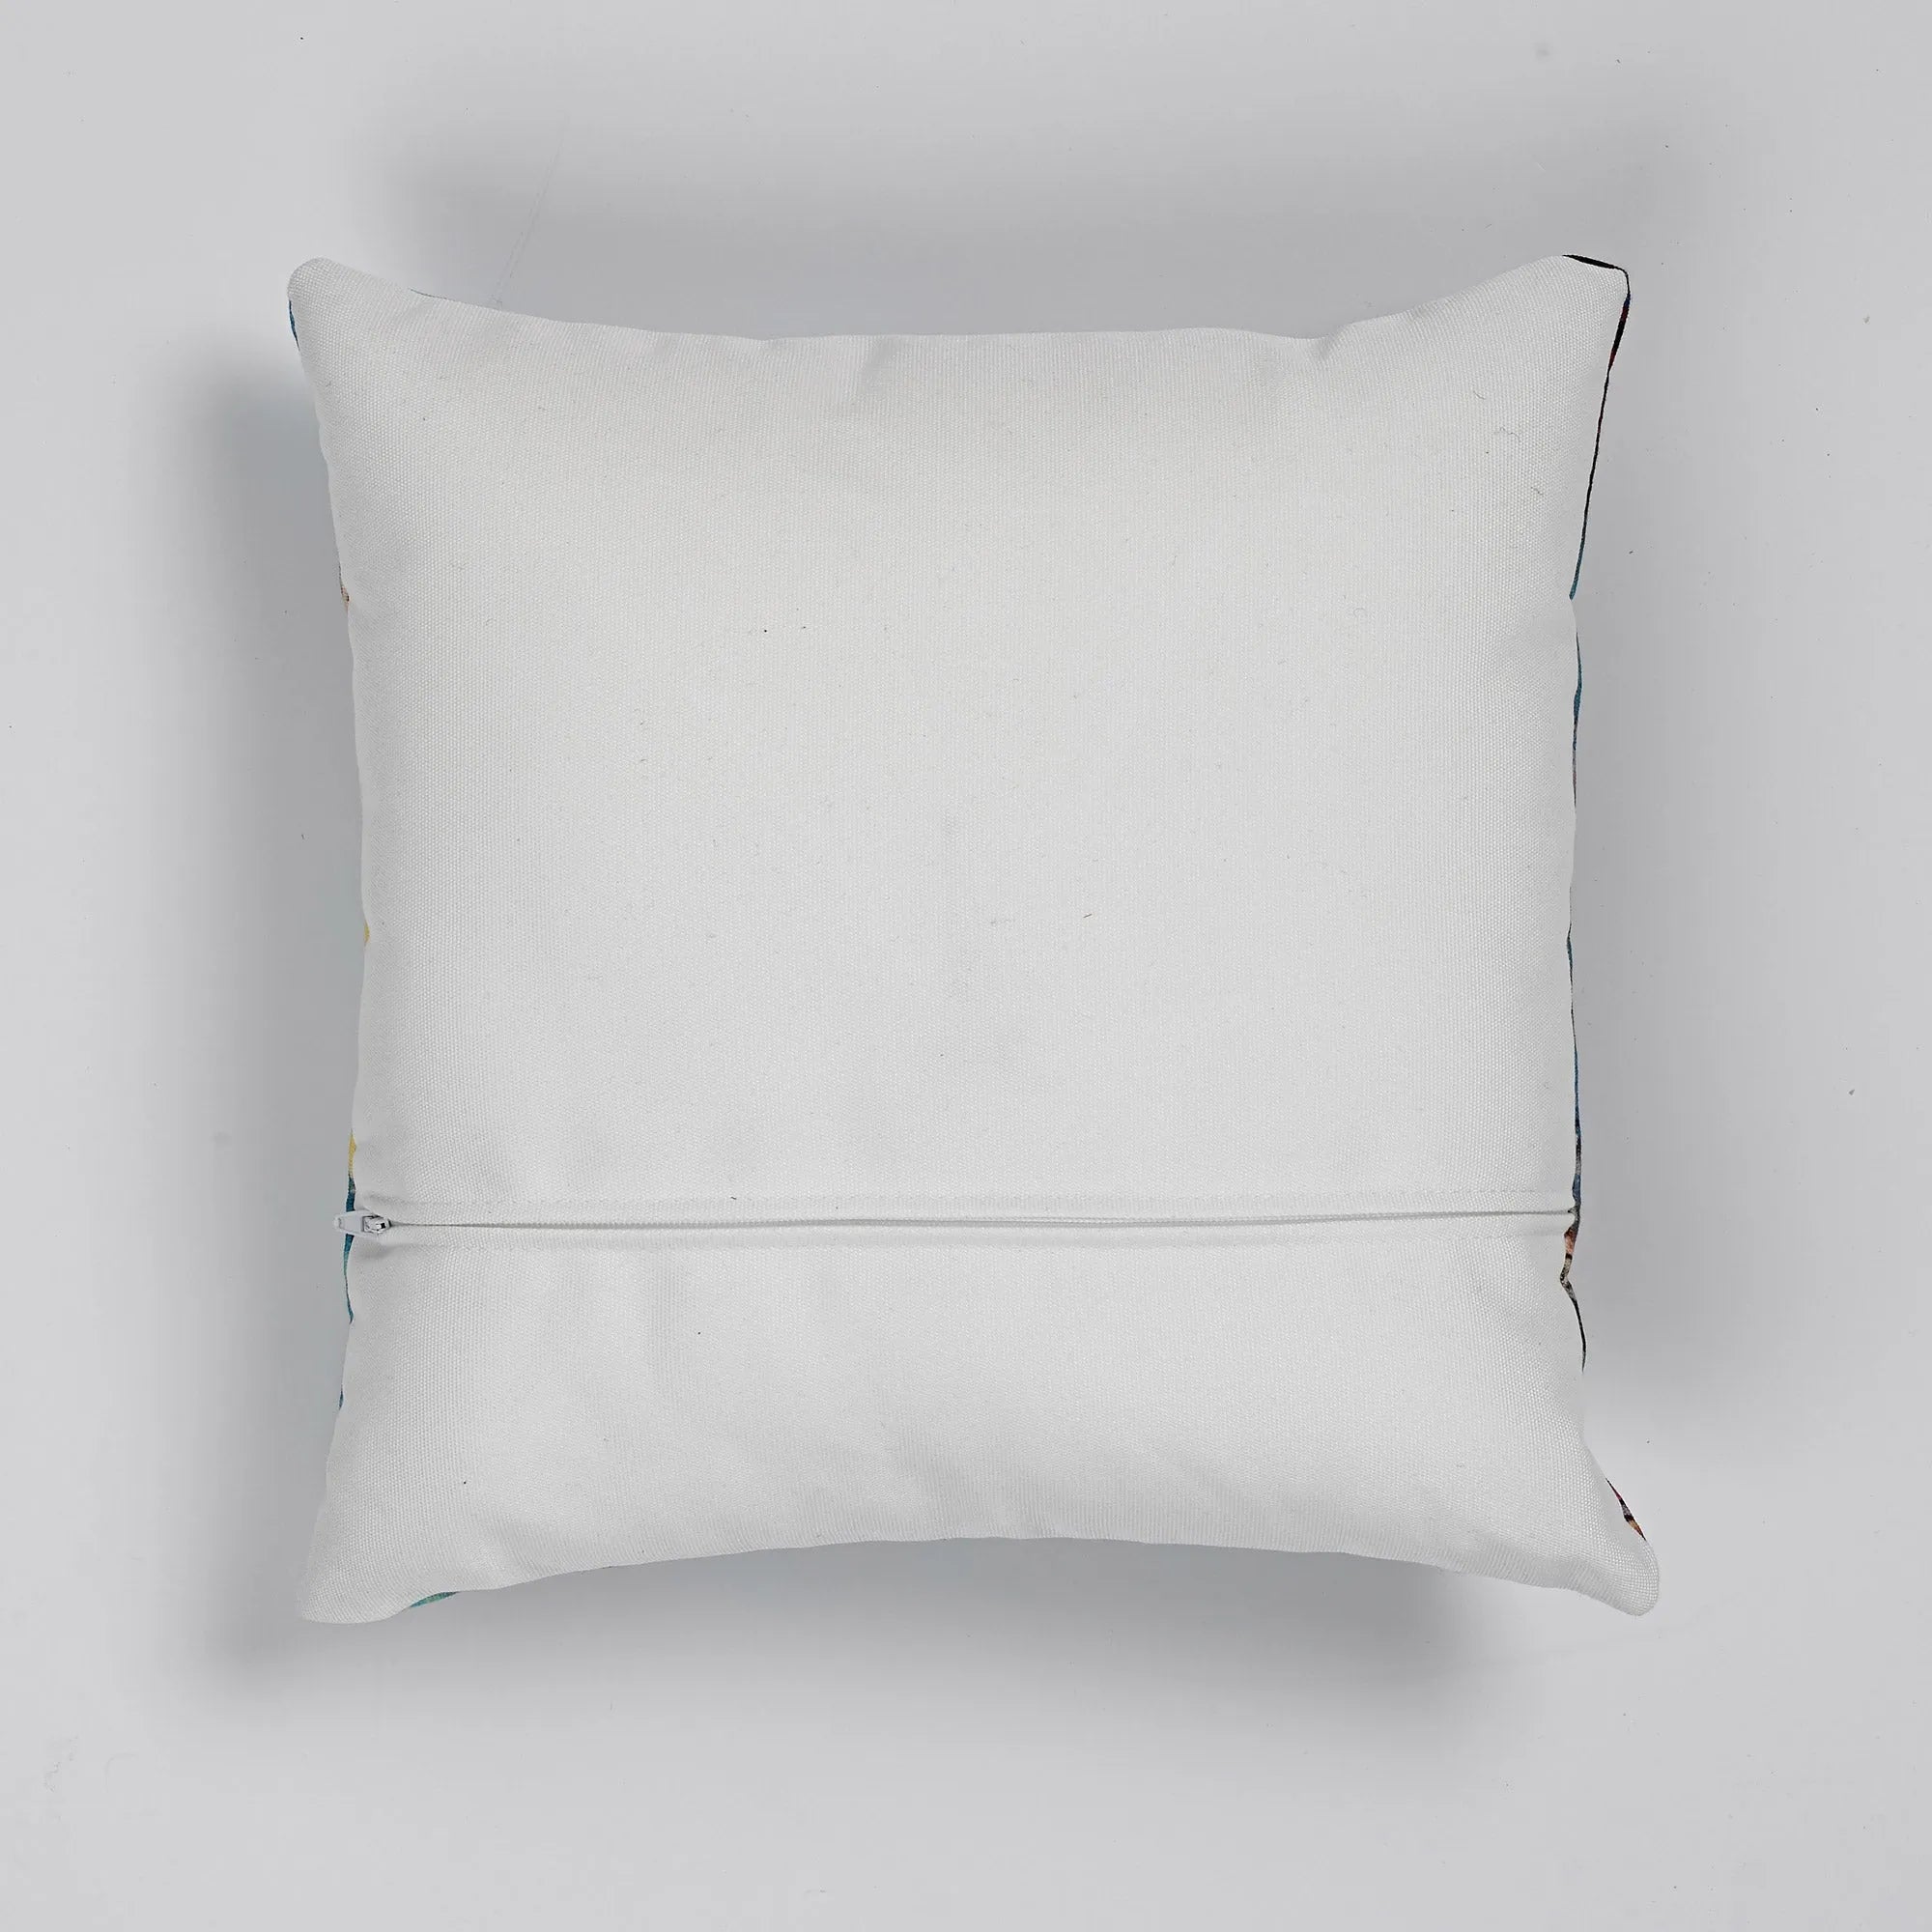 Chinese Emperor’s Courtier Cushion - Throw Pillows - Aesthetic Art